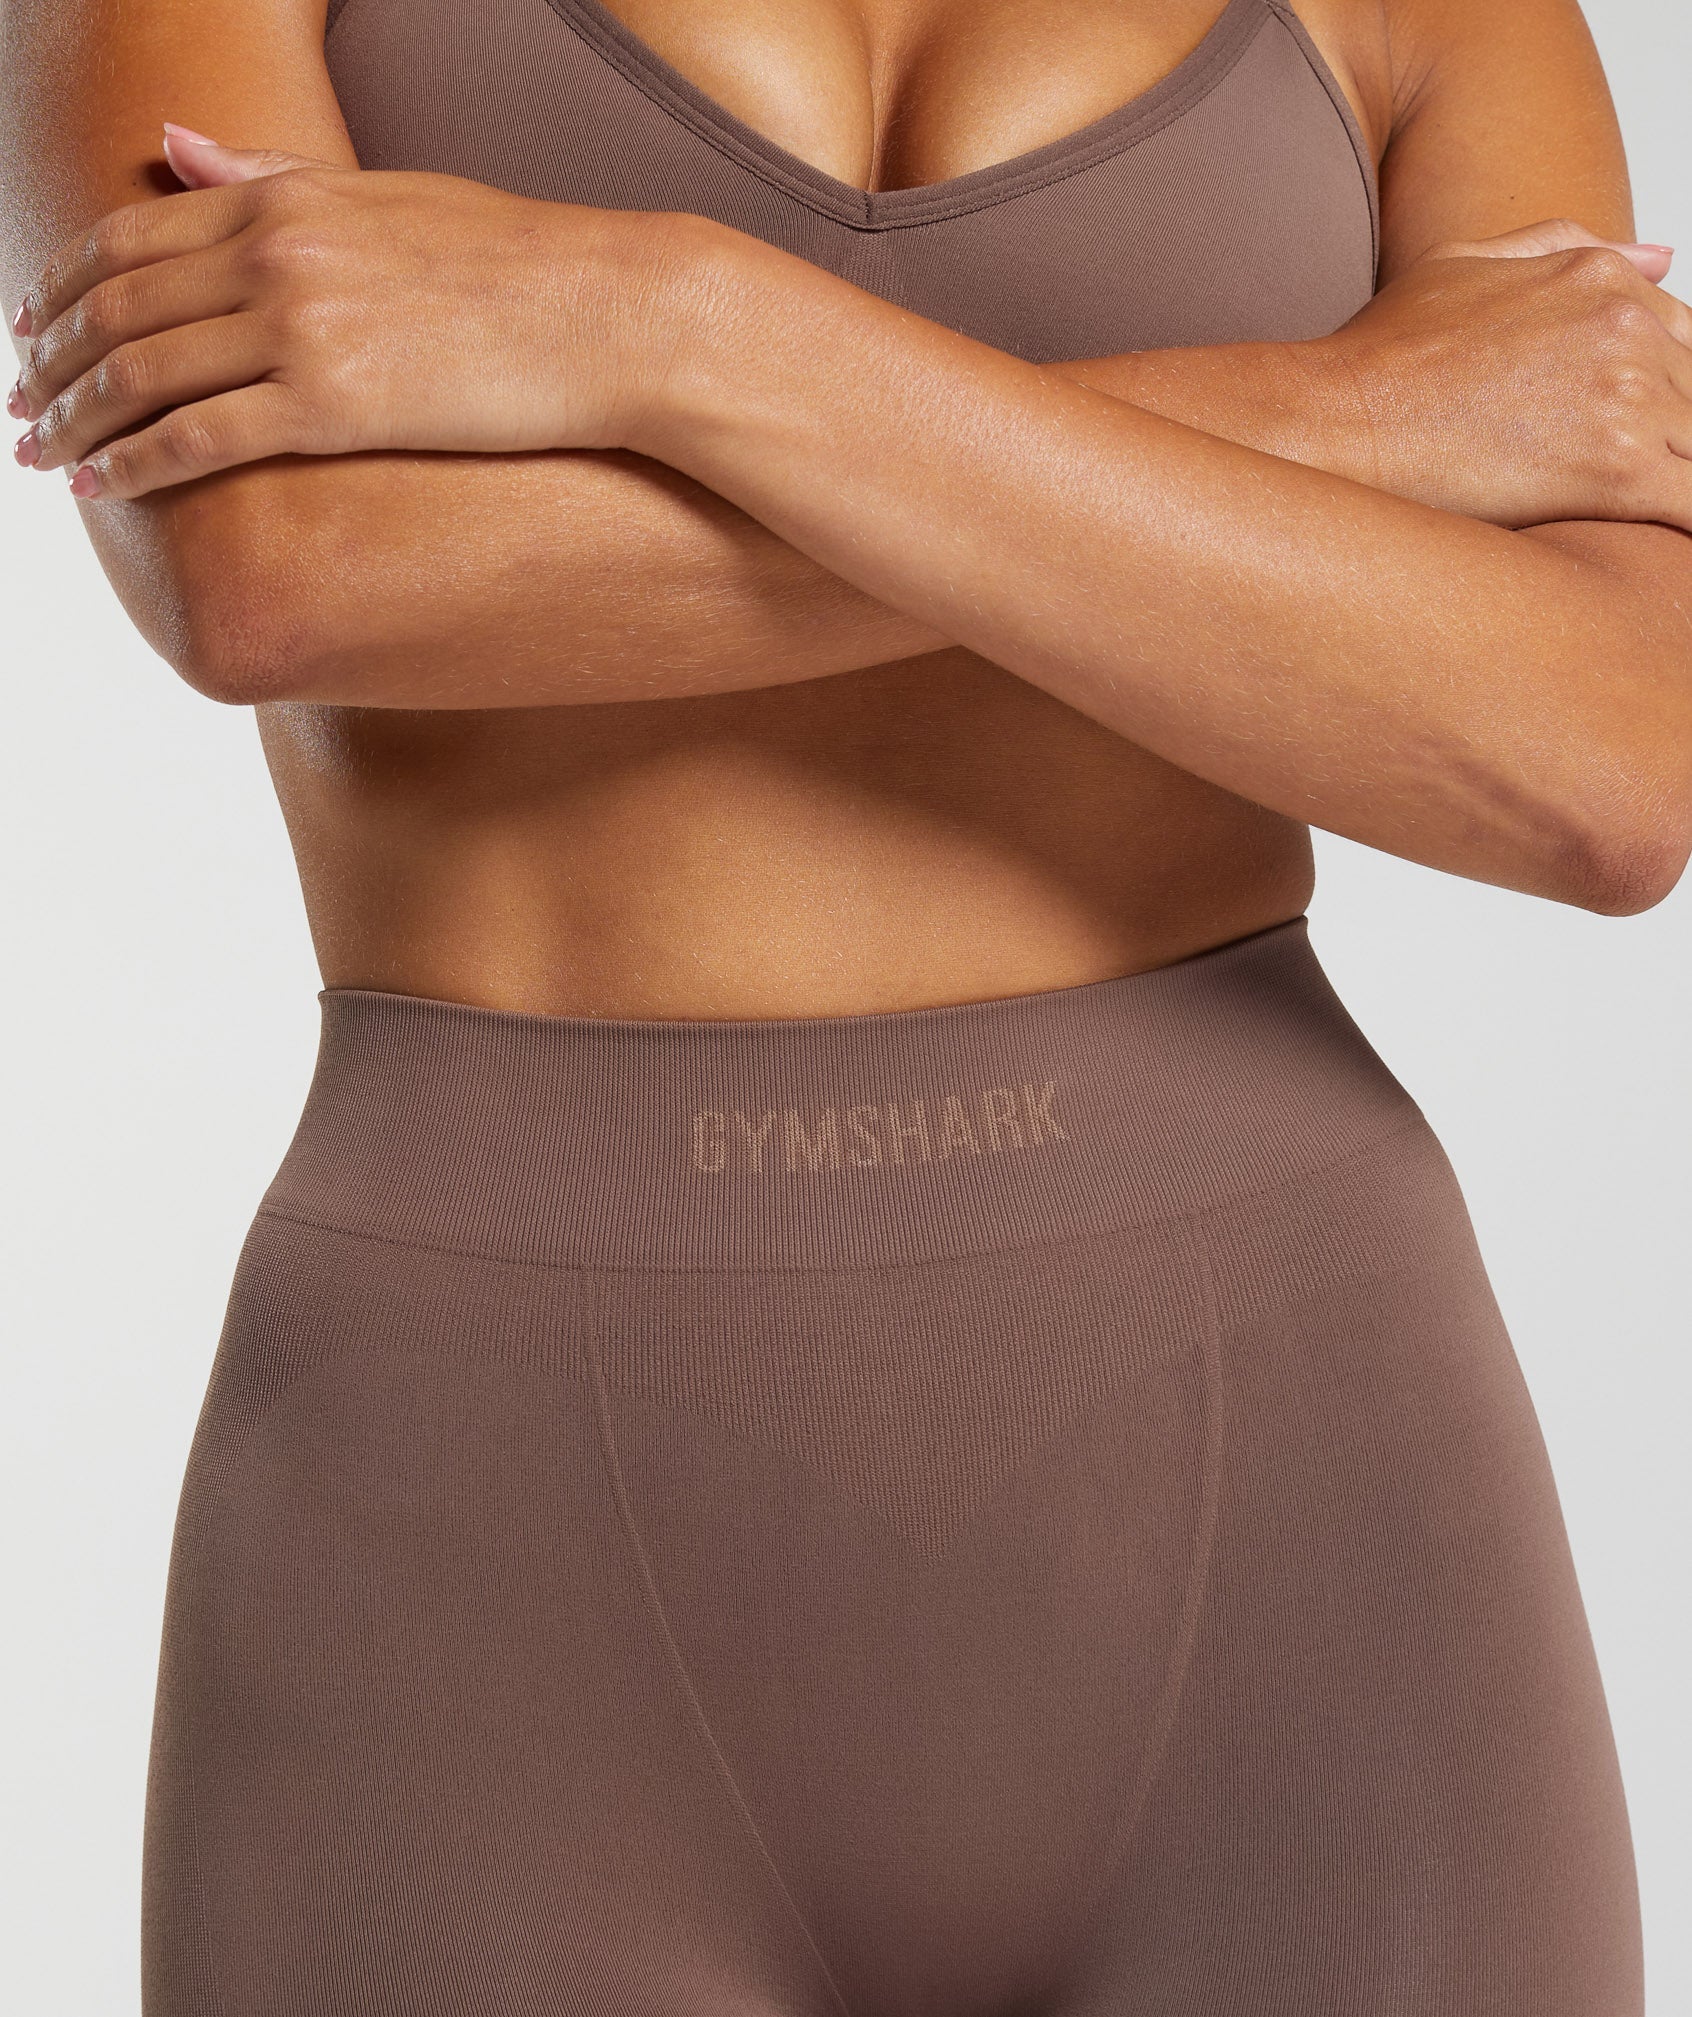 Gymshark Seamless Boxers - Espresso Brown